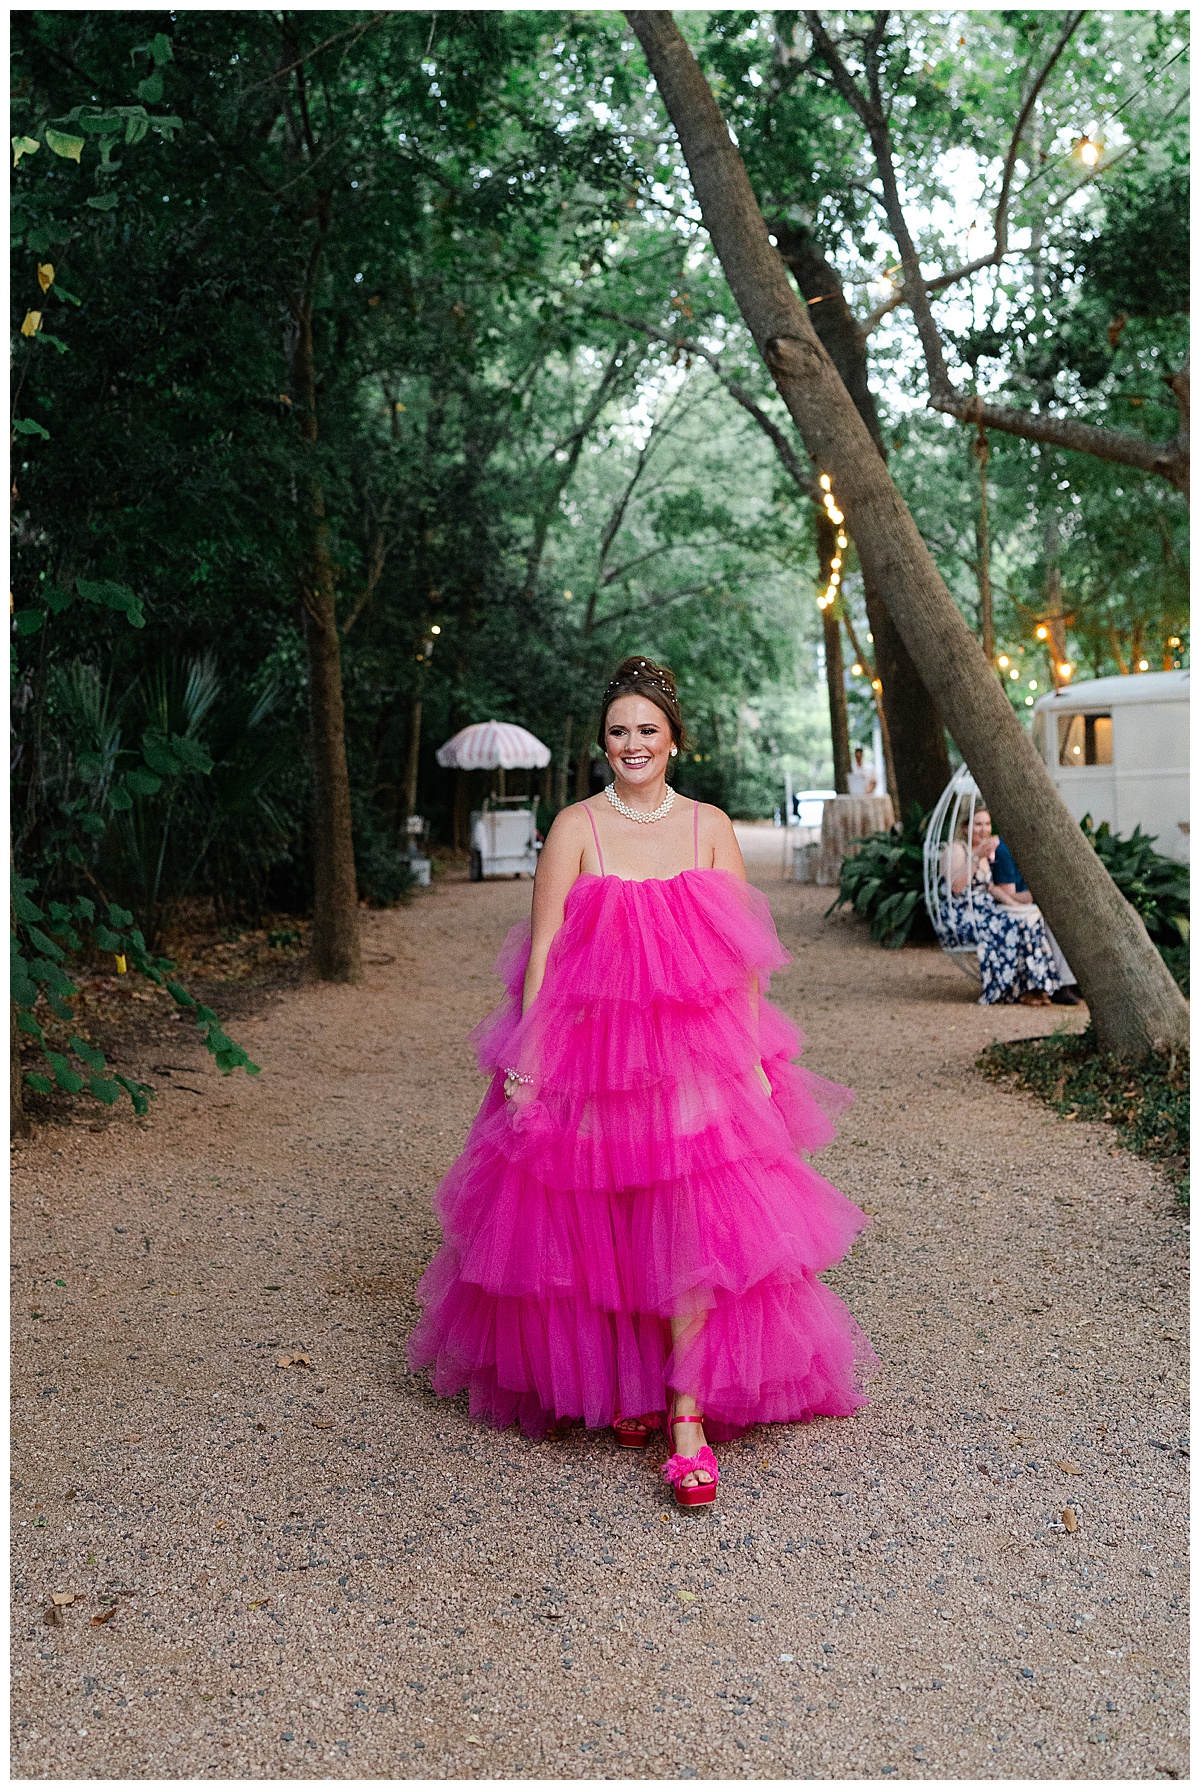 Woman walks in bright pink dress for Swish & Click Photography